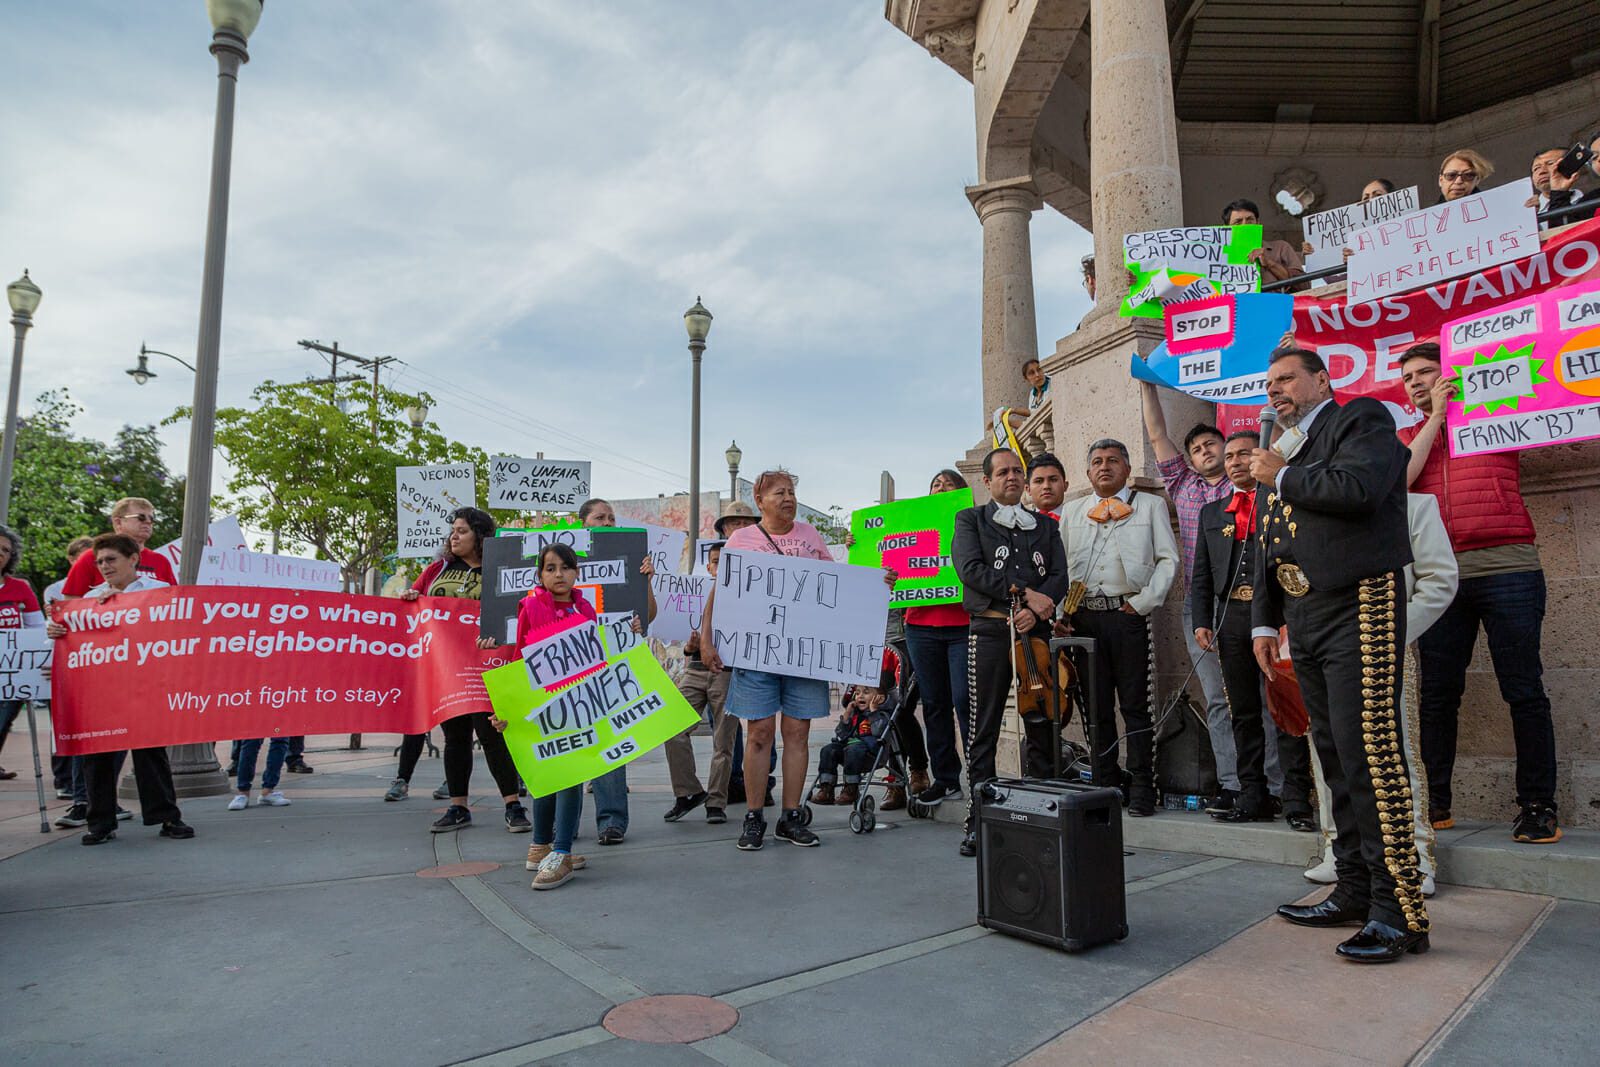 A mariachi speaks to residents in a Boyle Heights community after a landlord attempts to raise their rent by 60 to 80 percent. The group participated in rents strikes and negotiated a fair rent increase with their landlord.